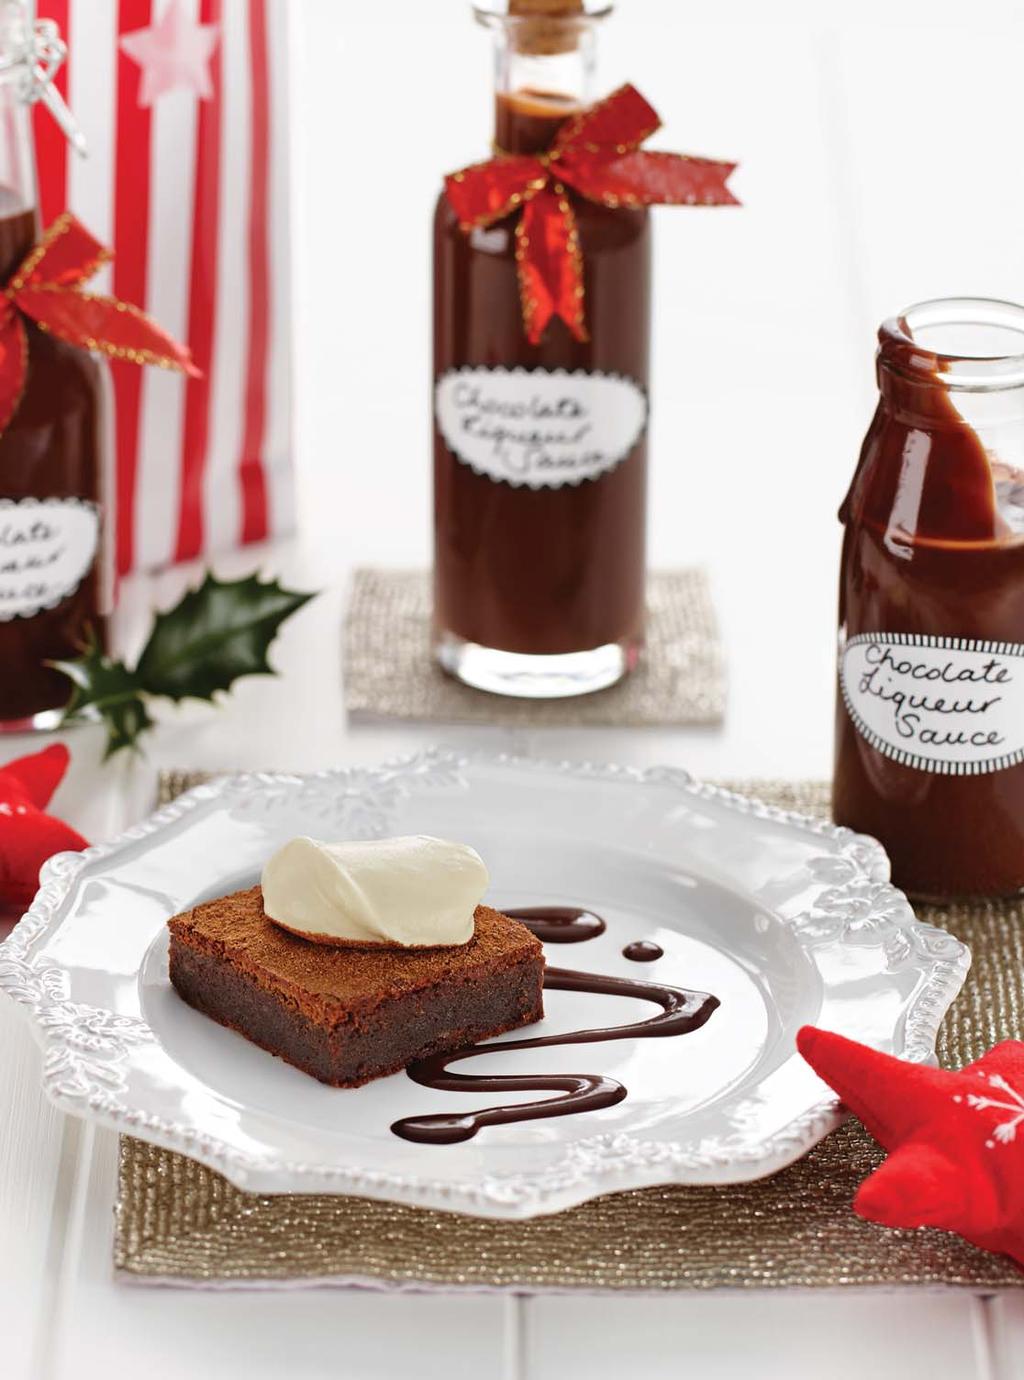 Chocolate Liqueur Sauce MAKES: 2 cups PREP: 5 minutes COOK: 10 minutes ½ cup water ½ cup bourbon ¹ 3 cup caster sugar 250g CADBURY Dark Chocolate Melts ¼ cup cream COMBINE the water, bourbon and